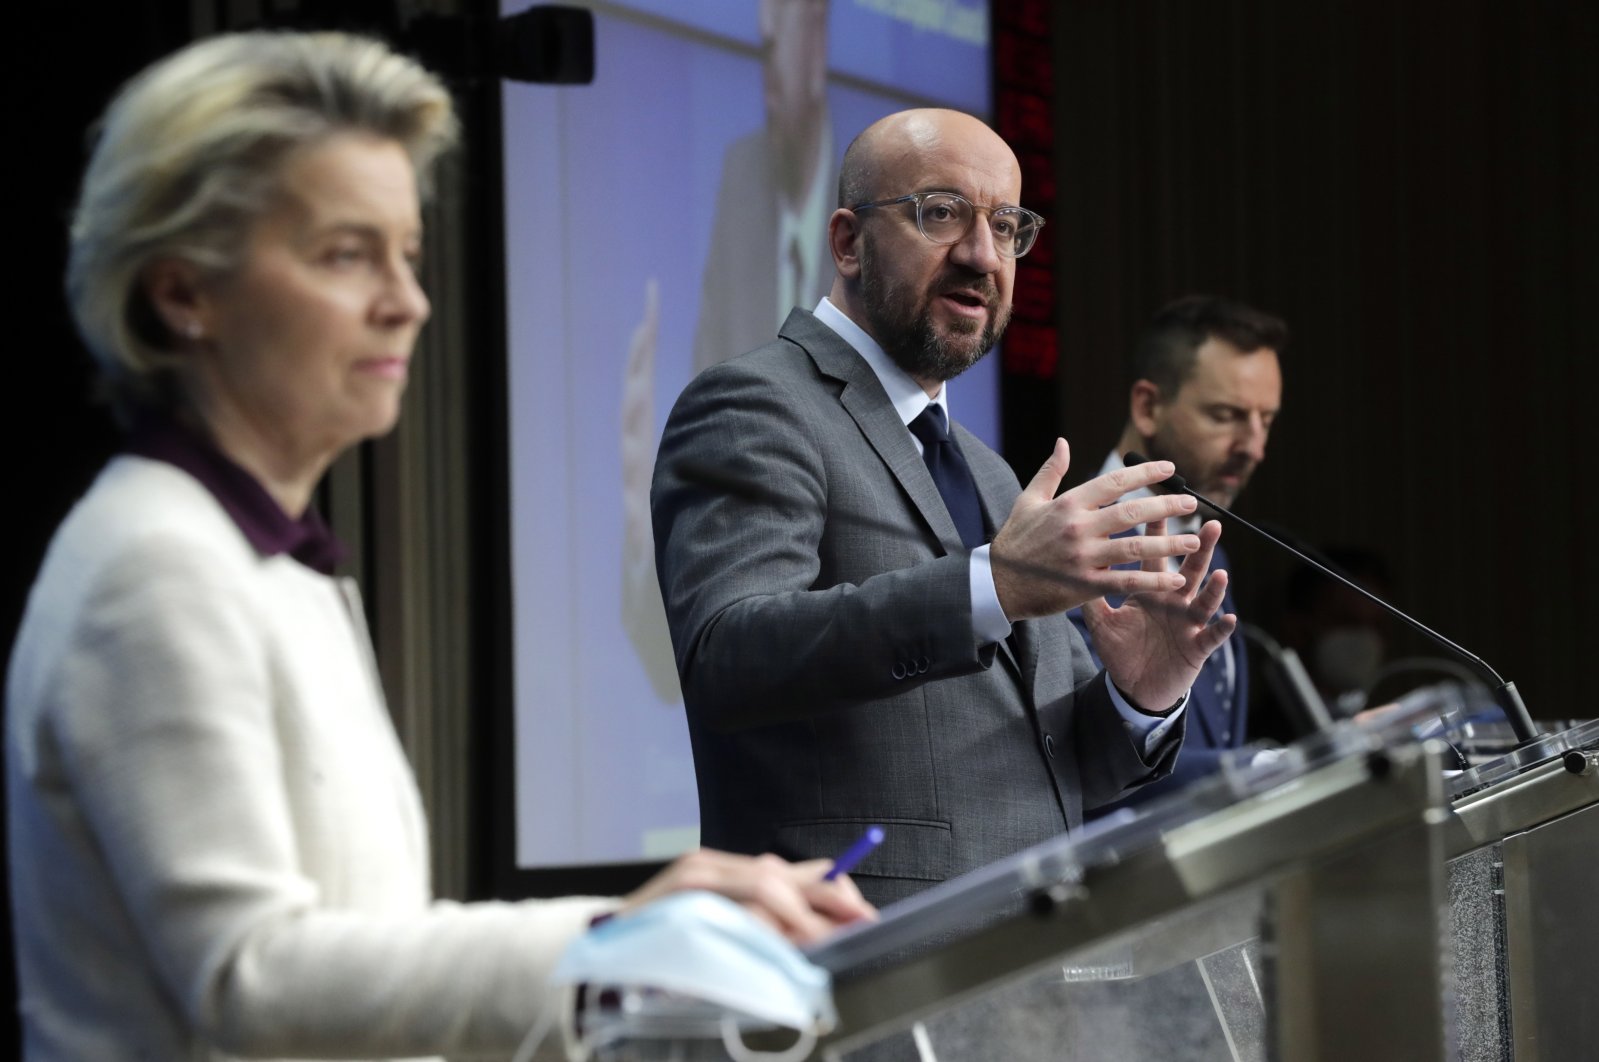 European Commission President Ursula von der Leyen (L) and European Council President Charles Michel (R) give a press conference after a video conference of the members of the European Council, in Brussels, Belgium, Jan. 21, 2021. (EPA Photo)